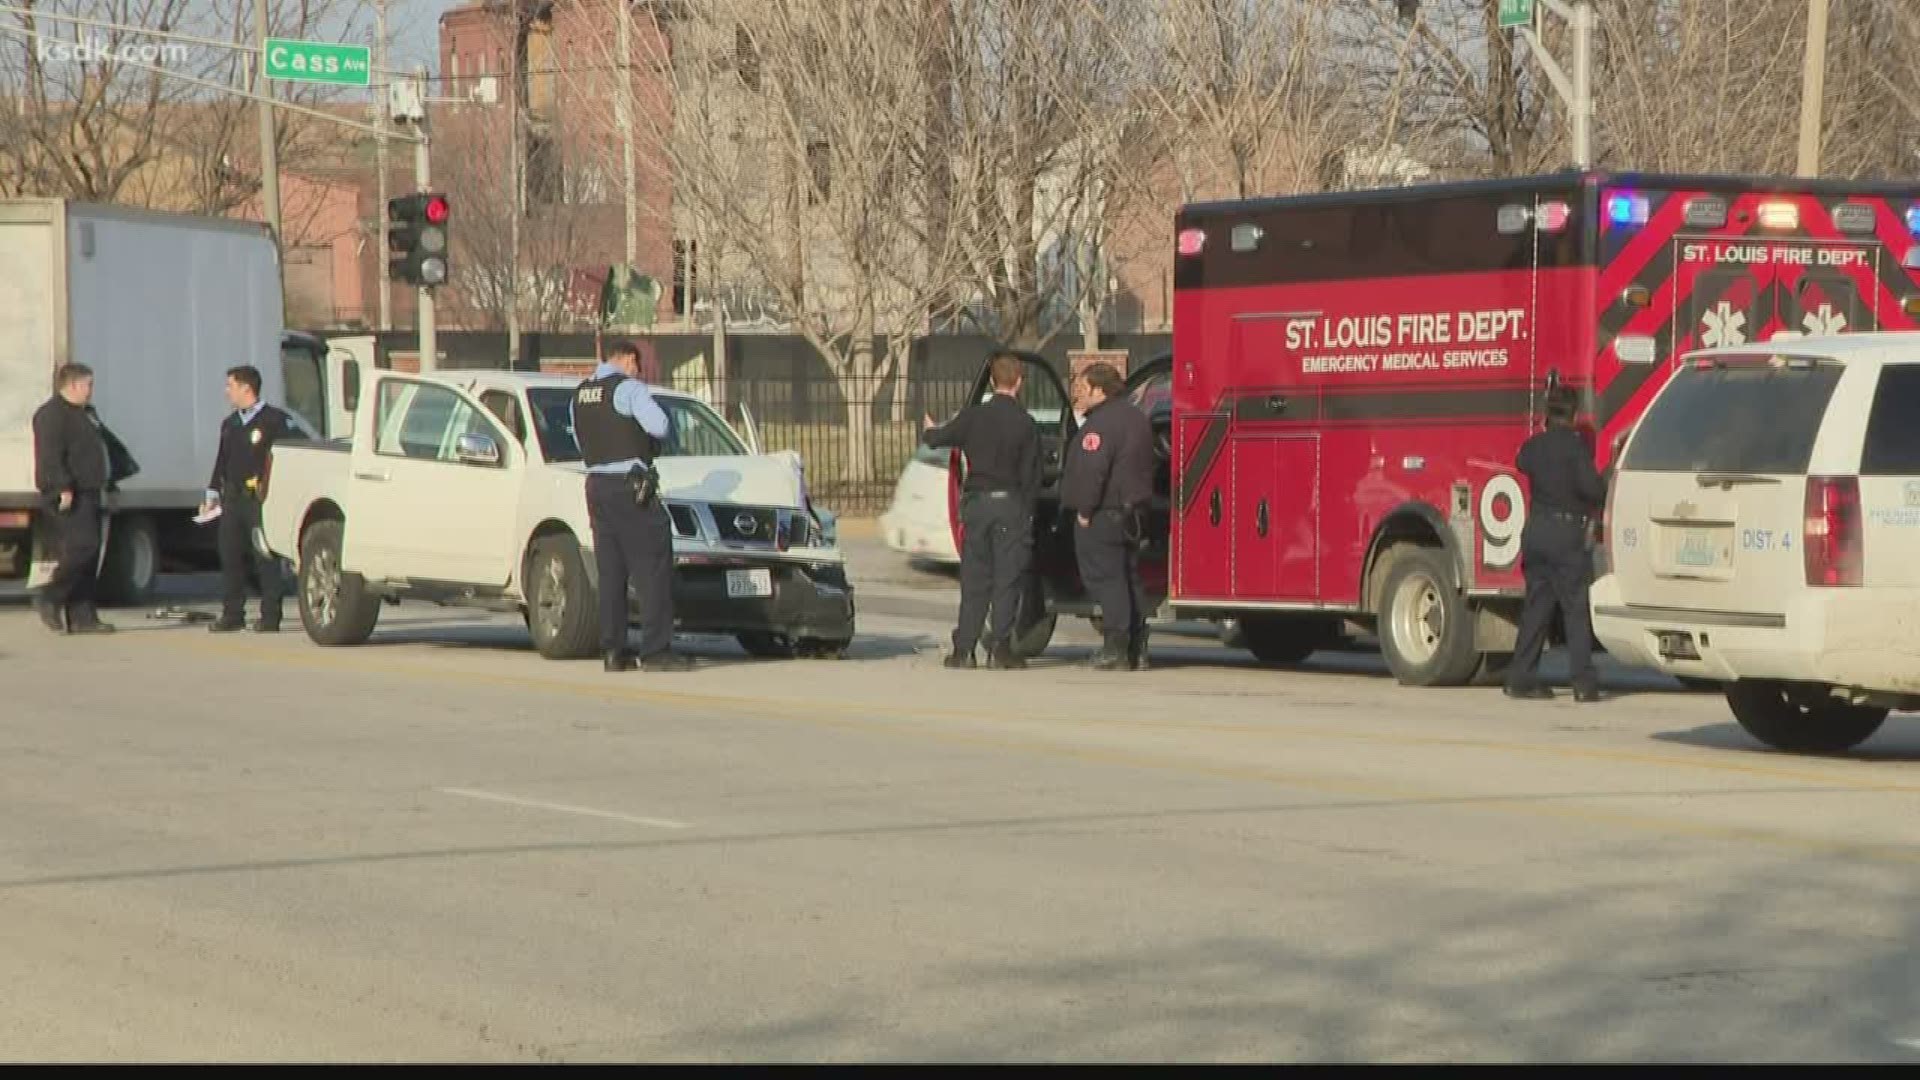 "We're at Cass and 15th, drive-by shooting. They just hit us," said a first responder sitting in a St. Louis Fire Department ambulance caught in a shooting.